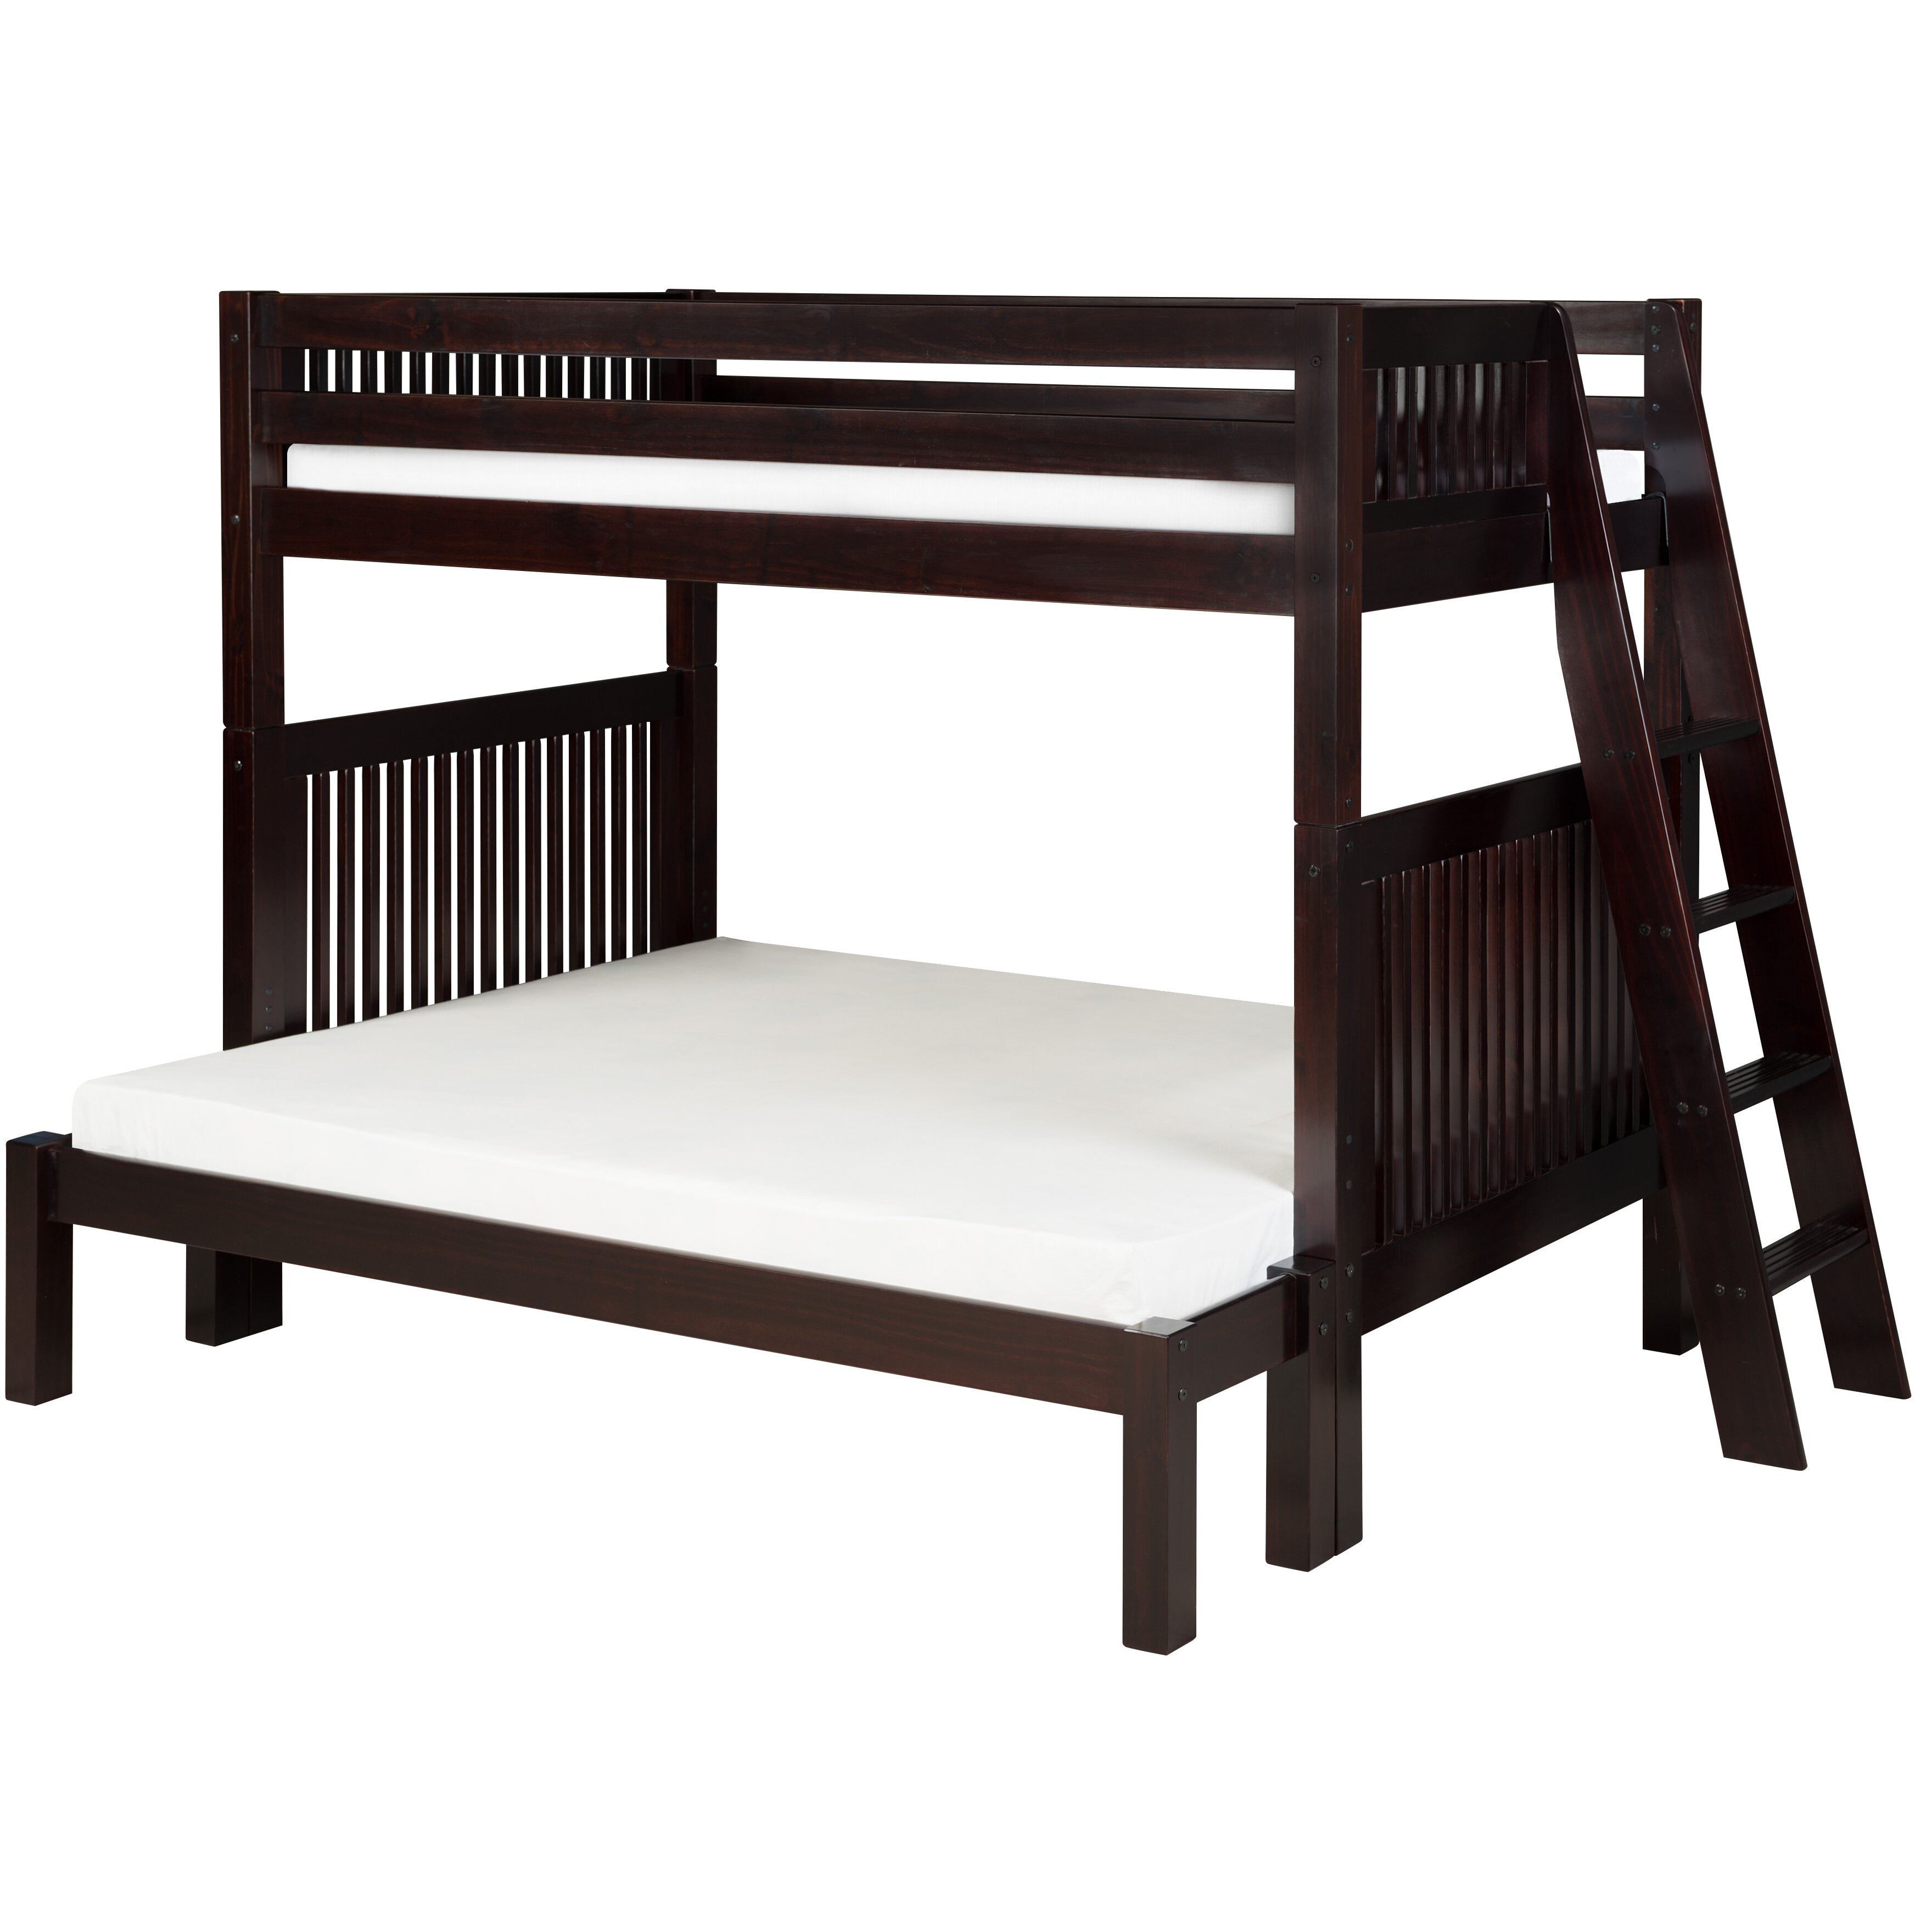 Camaflexi Twin Over Full Bunk Bed And Reviews Wayfair